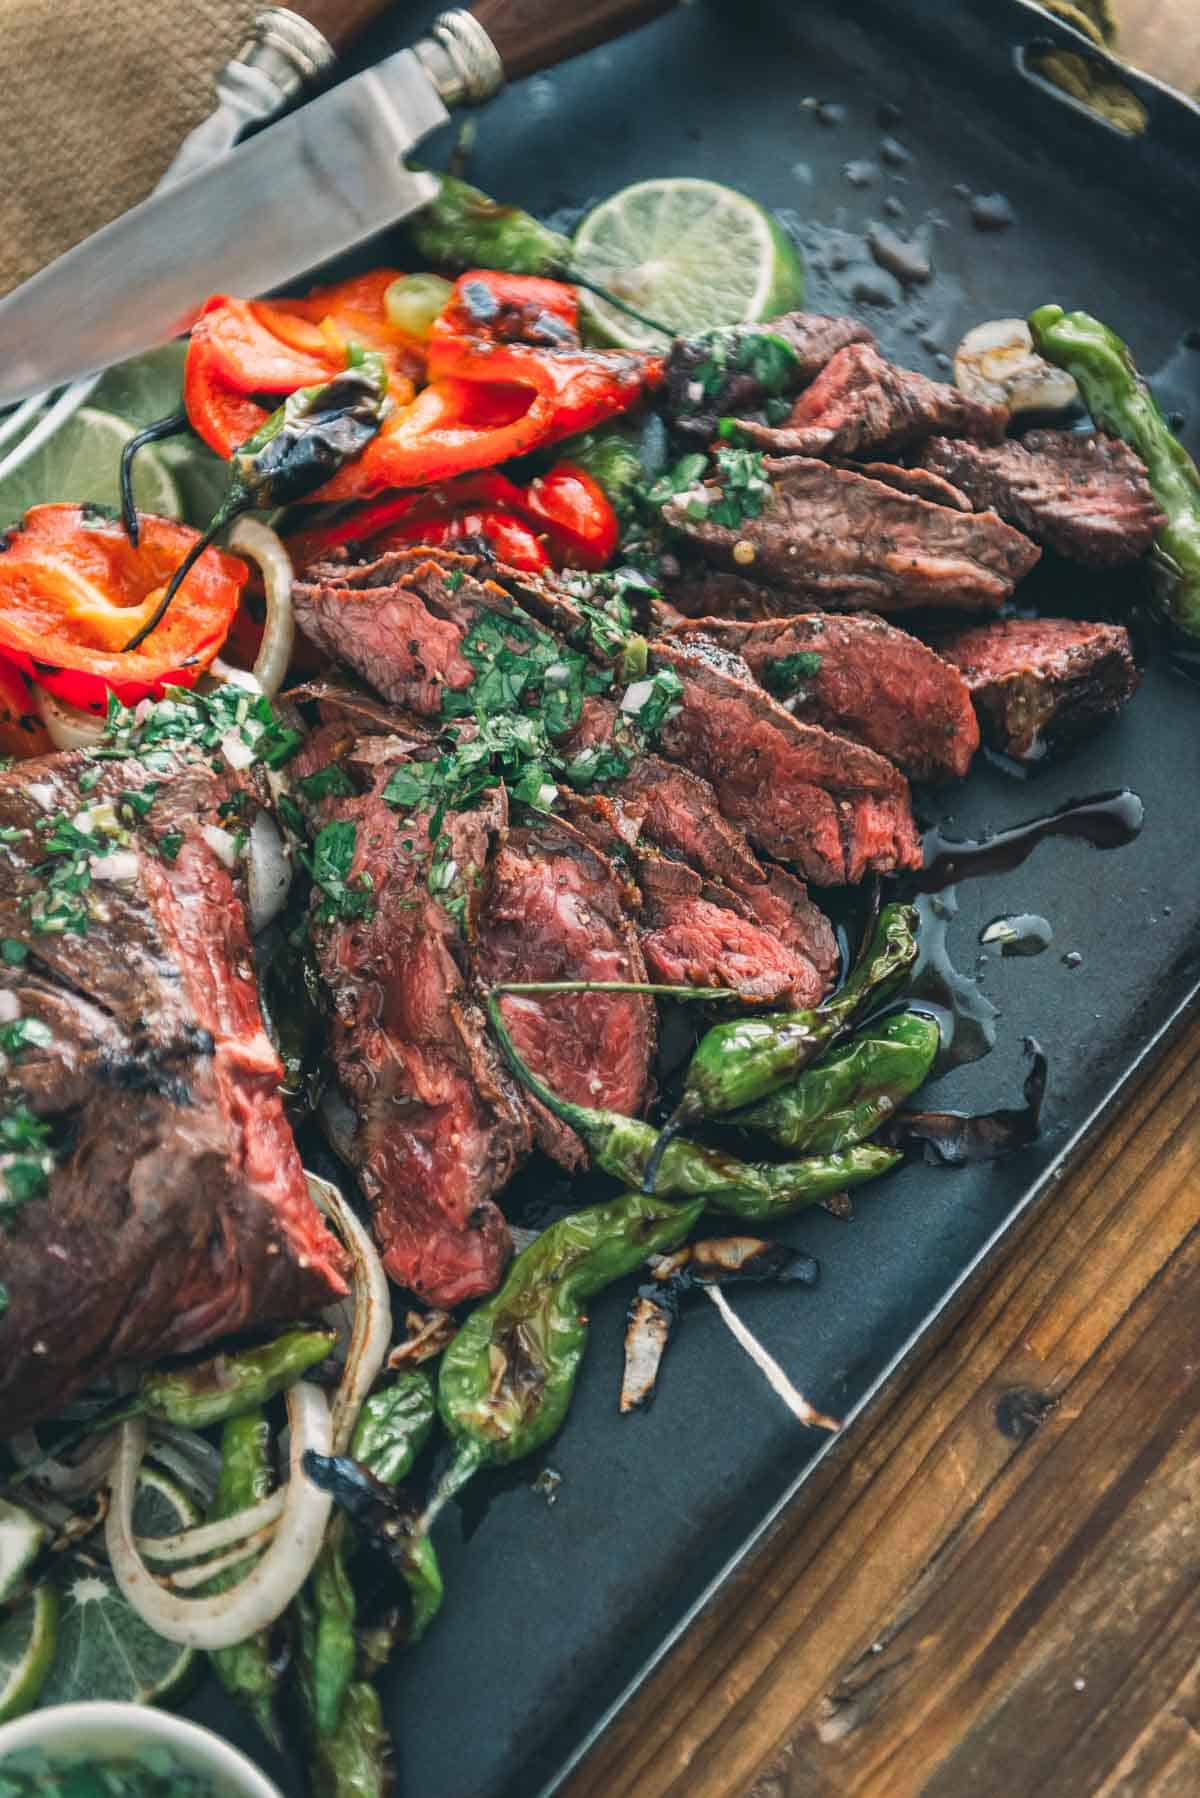 Grilled hanger steak with peppers and onions on a black tray.